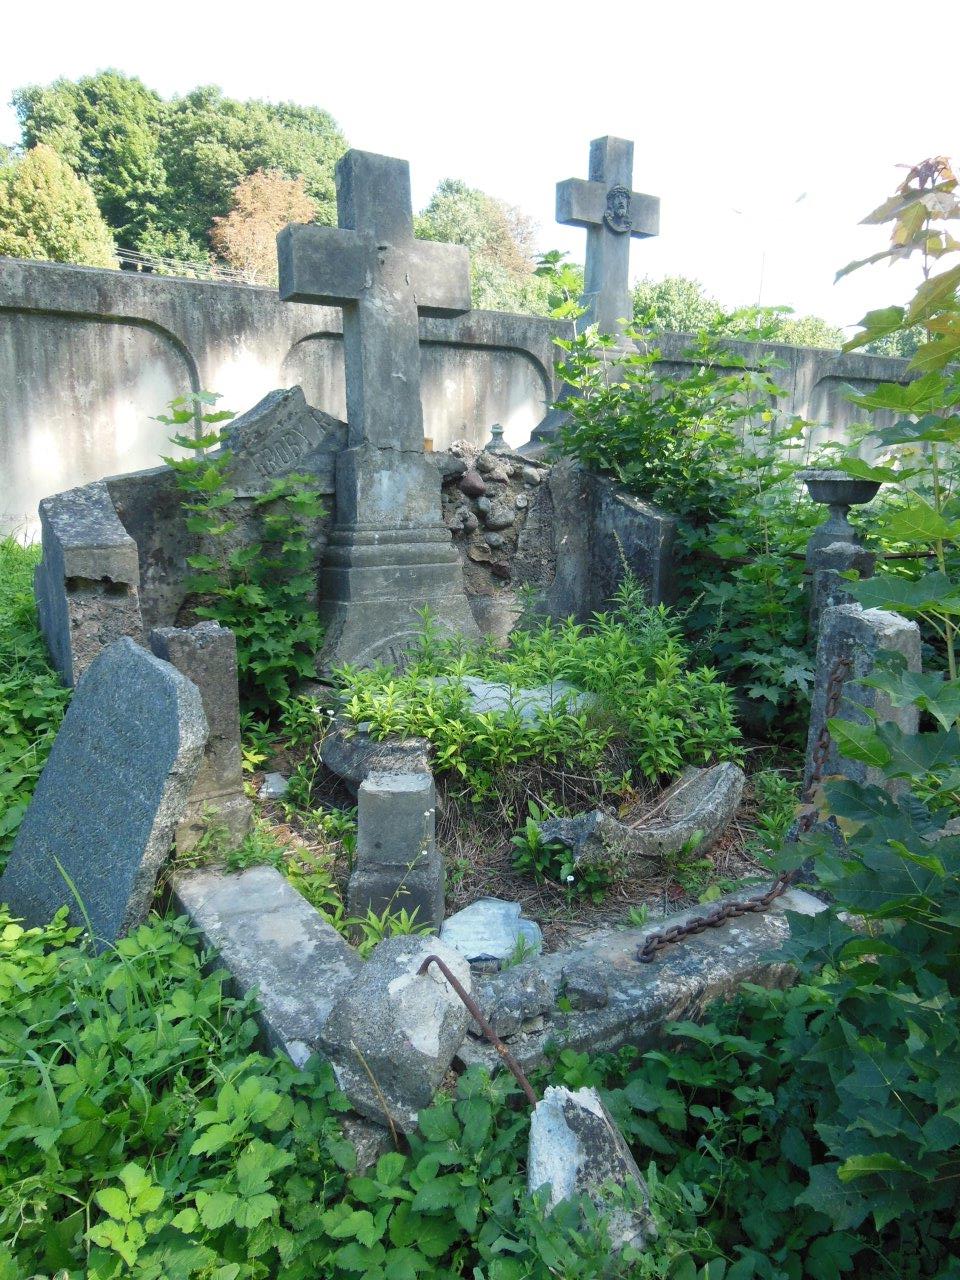 The tomb of Karol Krasowski from the Ross Cemetery in Vilnius, as of 2013.